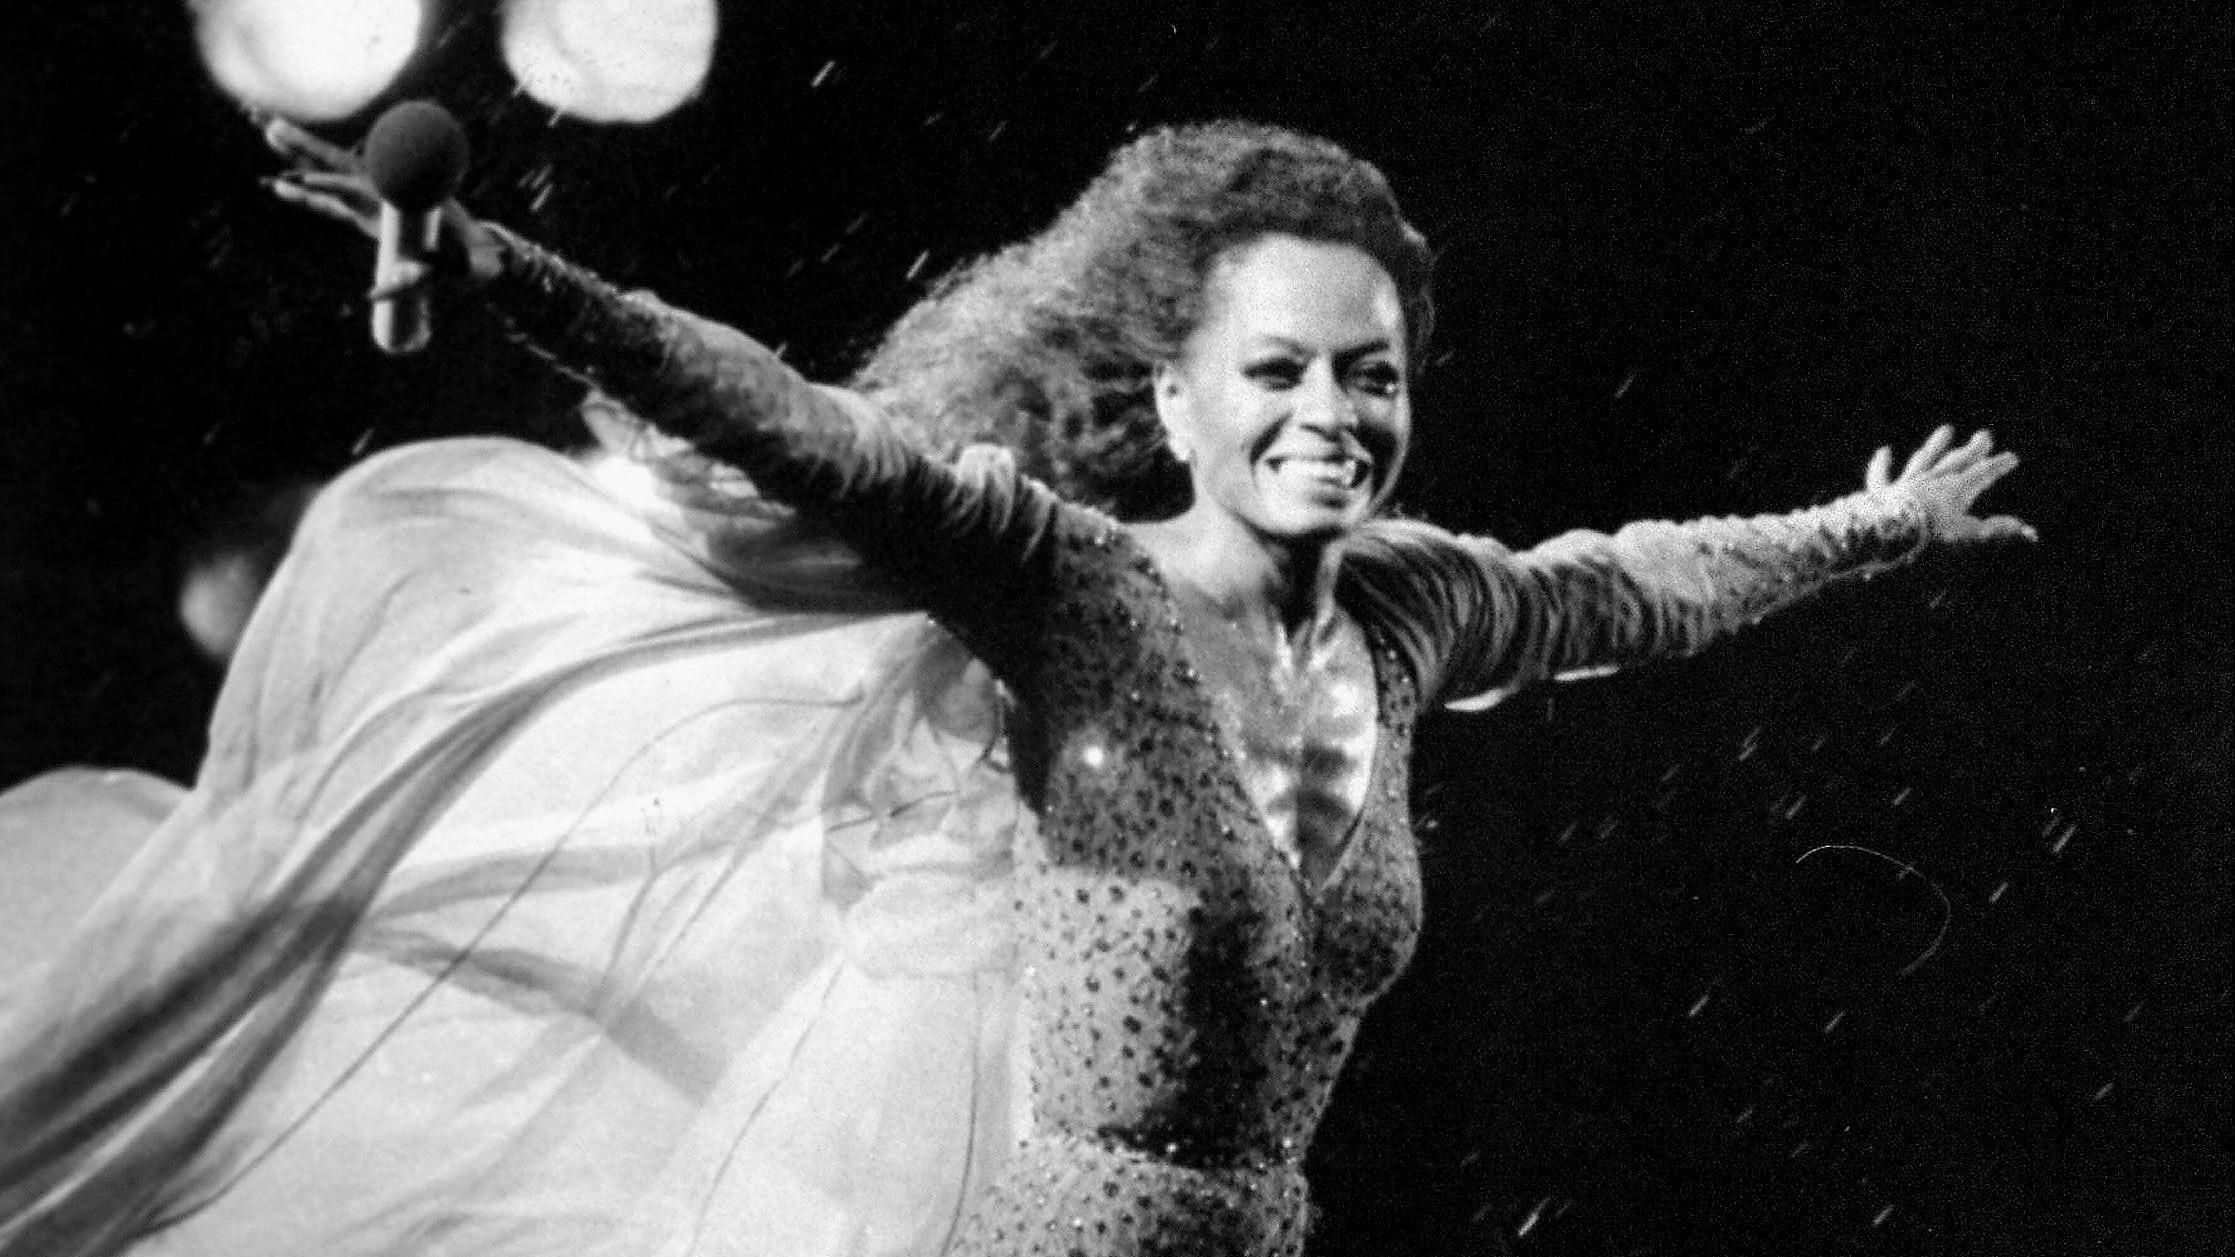 Diana Ross: Live in Central Park backdrop